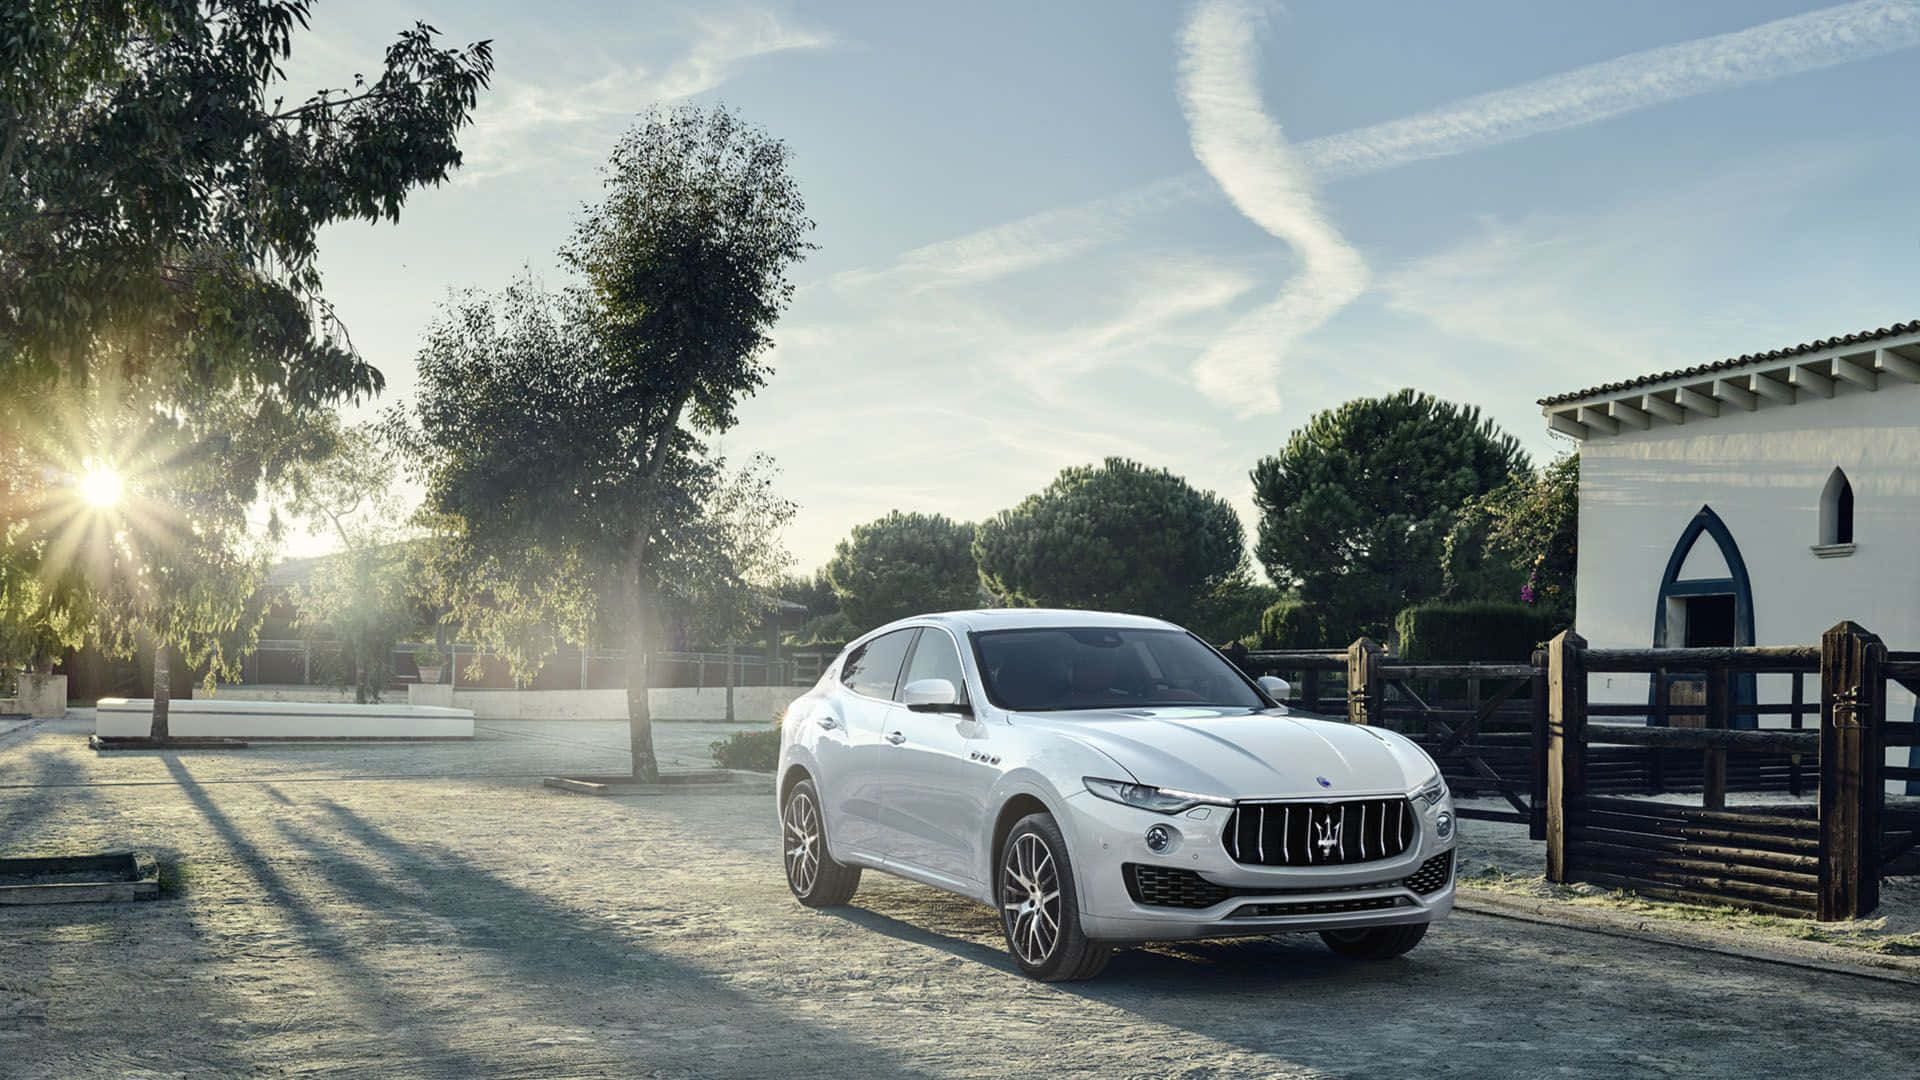 Caption: All-new Maserati Levante: The Definitive Expression Of Italian Design And Engineering Wallpaper